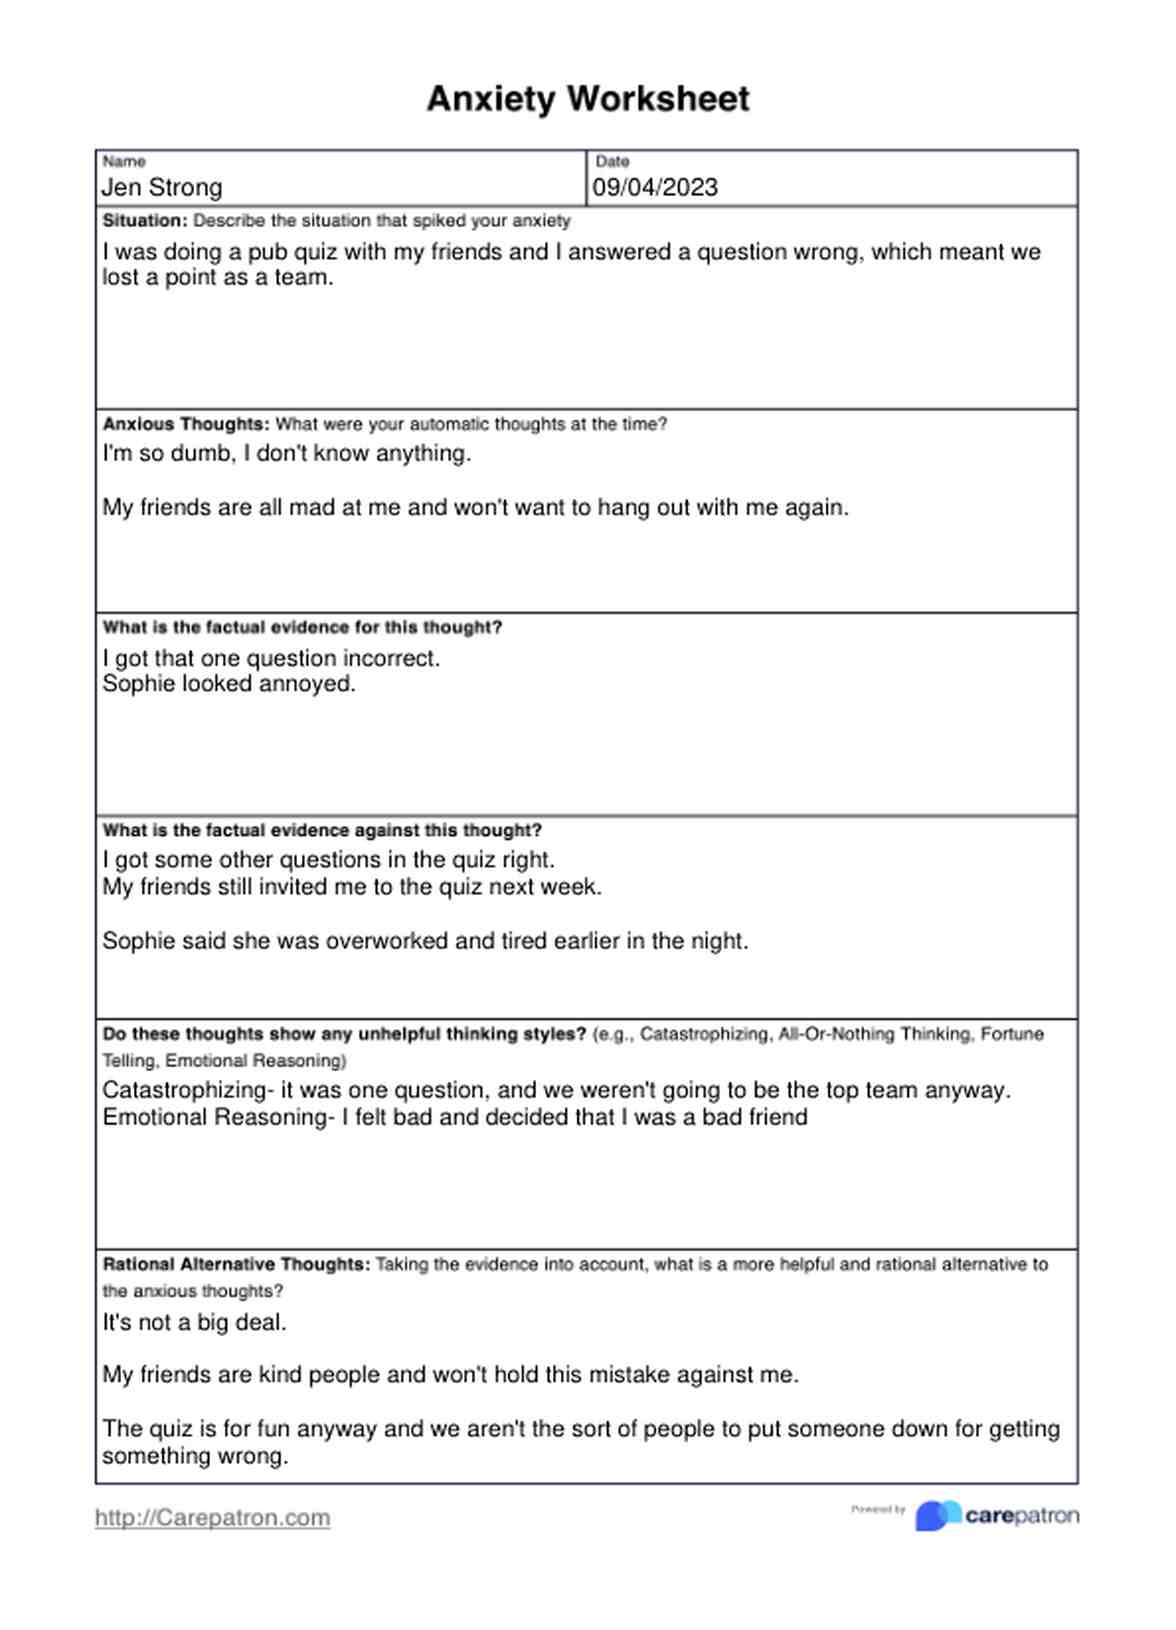 Anxiety Worksheets PDF Example